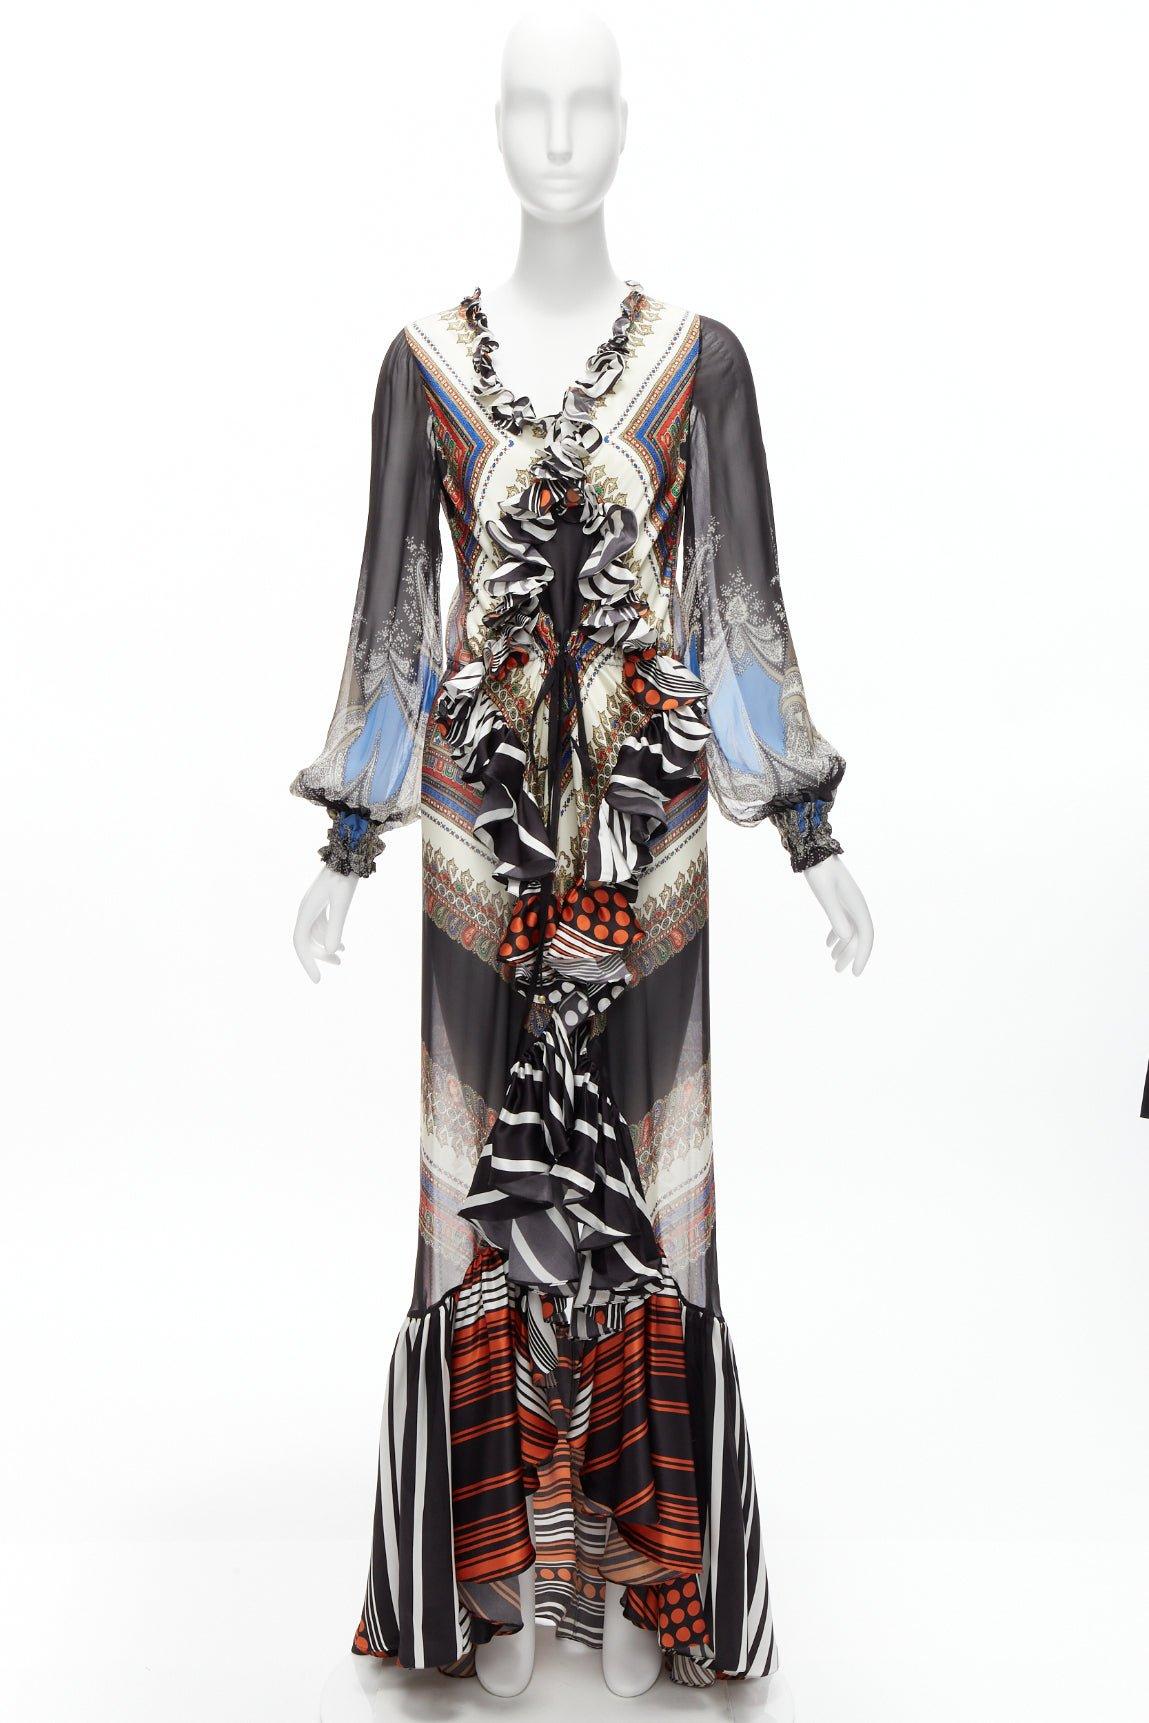 GIVENCHY RICCARDO TISCI 2013 Runway mixed print sheer ruffle gown dress FR38 M For Sale 5